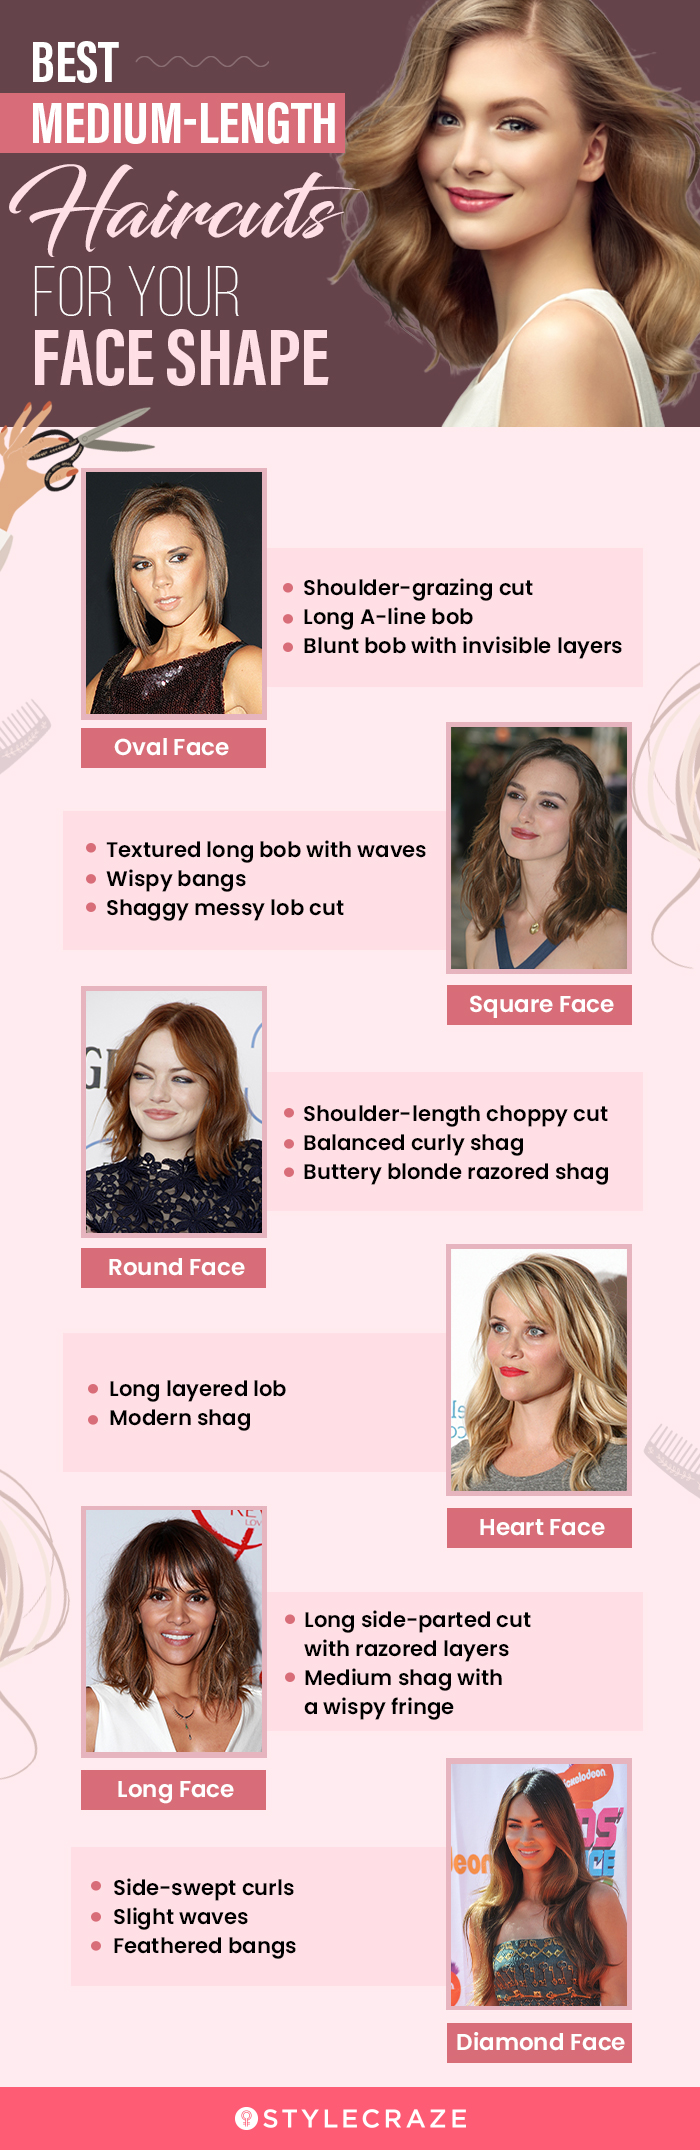 best haircuts for your face shape (infographic)